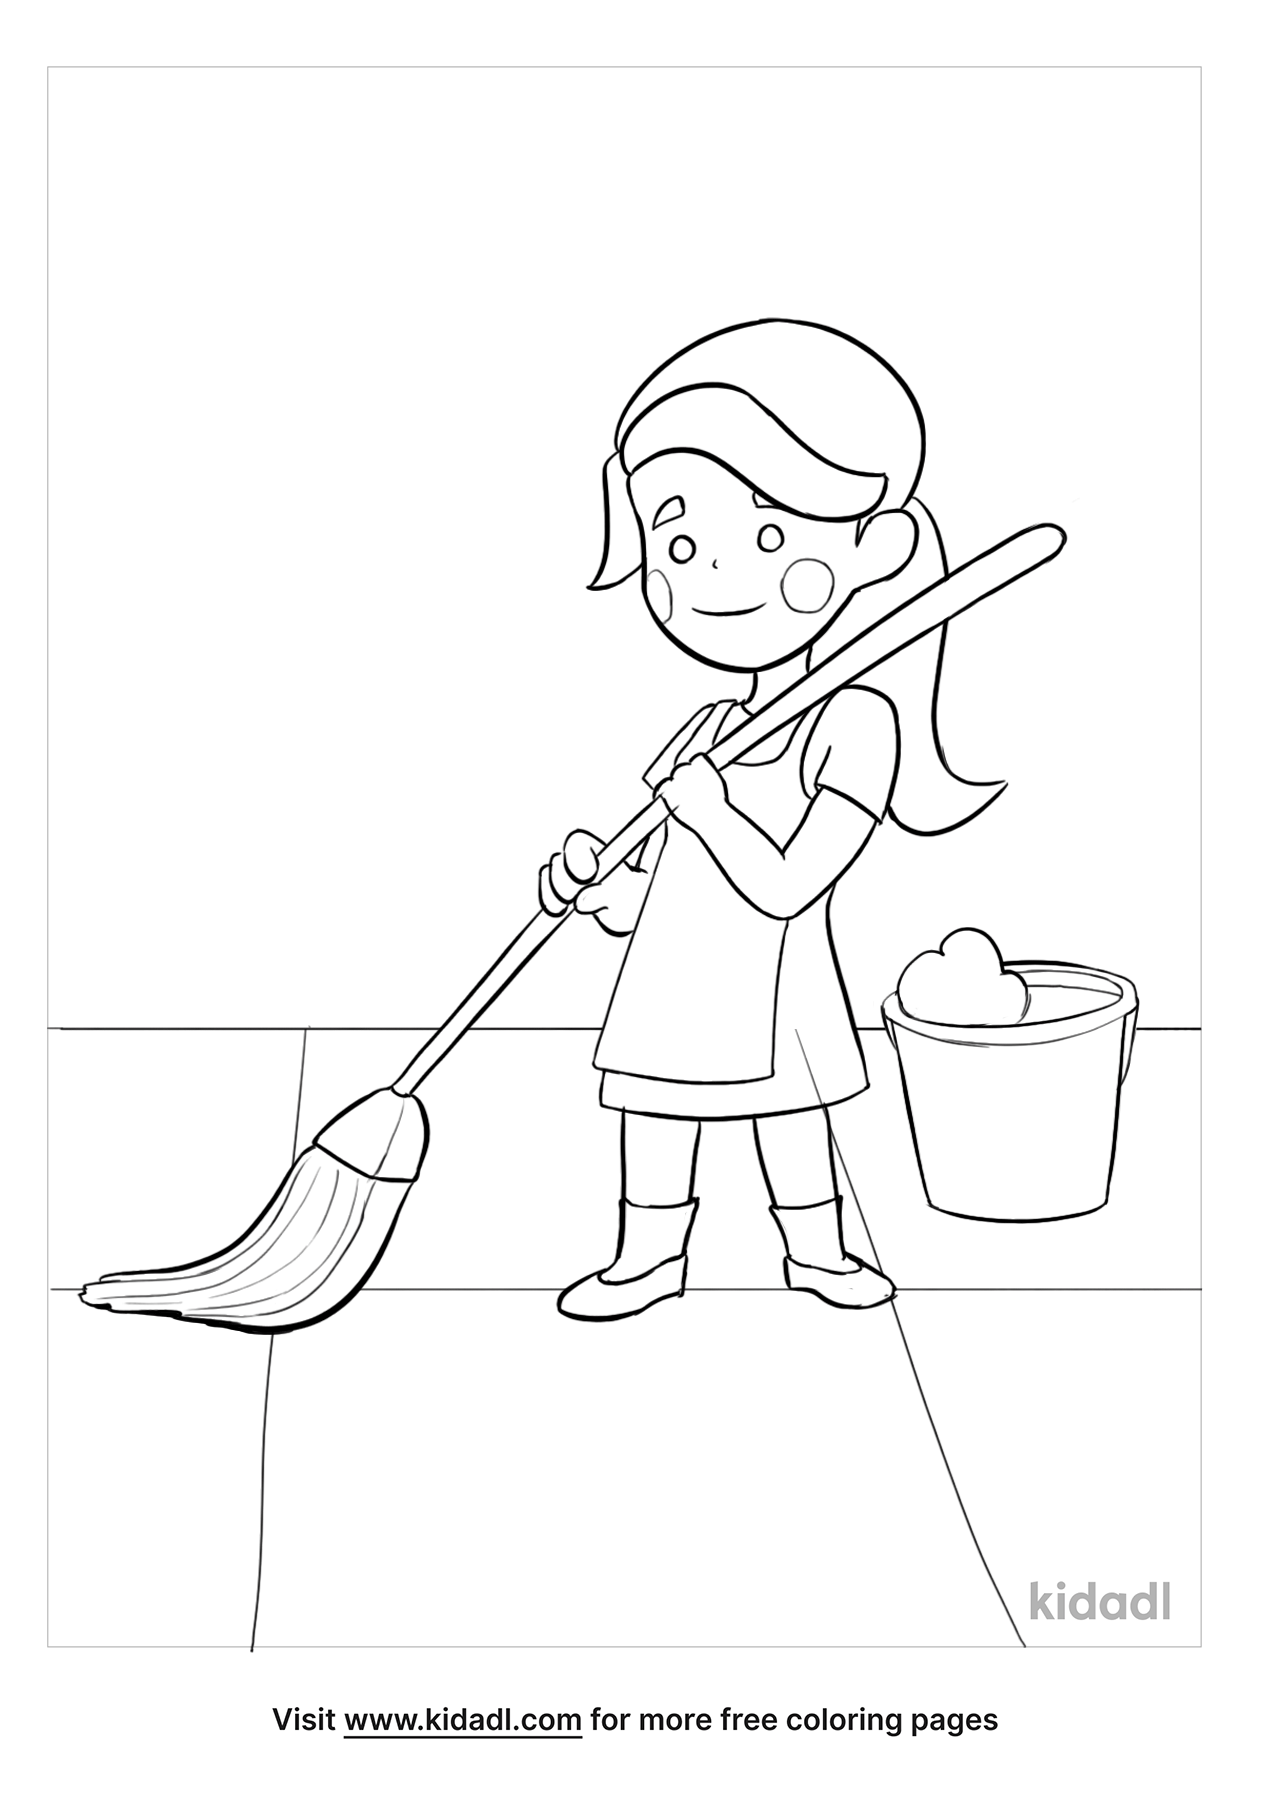 Clean Floor Coloring Pages | Free At-home Coloring Pages | Kidadl